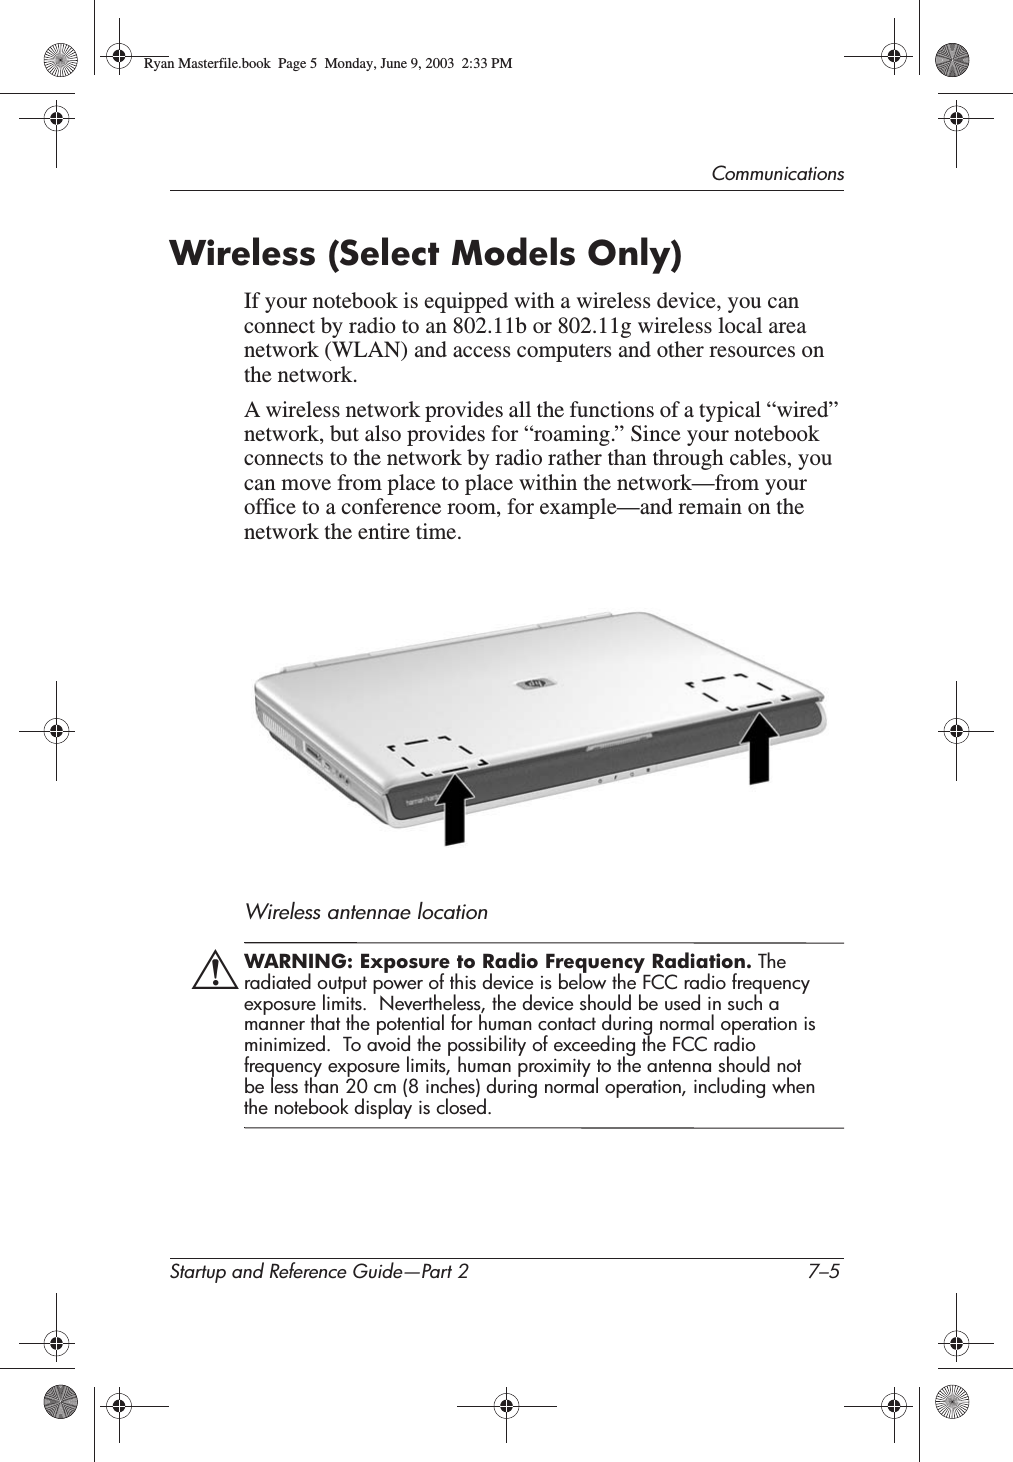 CommunicationsStartup and Reference Guide—Part 2 7–5Wireless (Select Models Only)If your notebook is equipped with a wireless device, you can connect by radio to an 802.11b or 802.11g wireless local area network (WLAN) and access computers and other resources on the network.A wireless network provides all the functions of a typical “wired” network, but also provides for “roaming.” Since your notebook connects to the network by radio rather than through cables, you can move from place to place within the network—from your office to a conference room, for example—and remain on the network the entire time.Wireless antennae locationÅWARNING: Exposure to Radio Frequency Radiation. The radiated output power of this device is below the FCC radio frequency exposure limits.  Nevertheless, the device should be used in such a manner that the potential for human contact during normal operation is minimized.  To avoid the possibility of exceeding the FCC radio frequency exposure limits, human proximity to the antenna should not be less than 20 cm (8 inches) during normal operation, including when the notebook display is closed.Ryan Masterfile.book  Page 5  Monday, June 9, 2003  2:33 PM